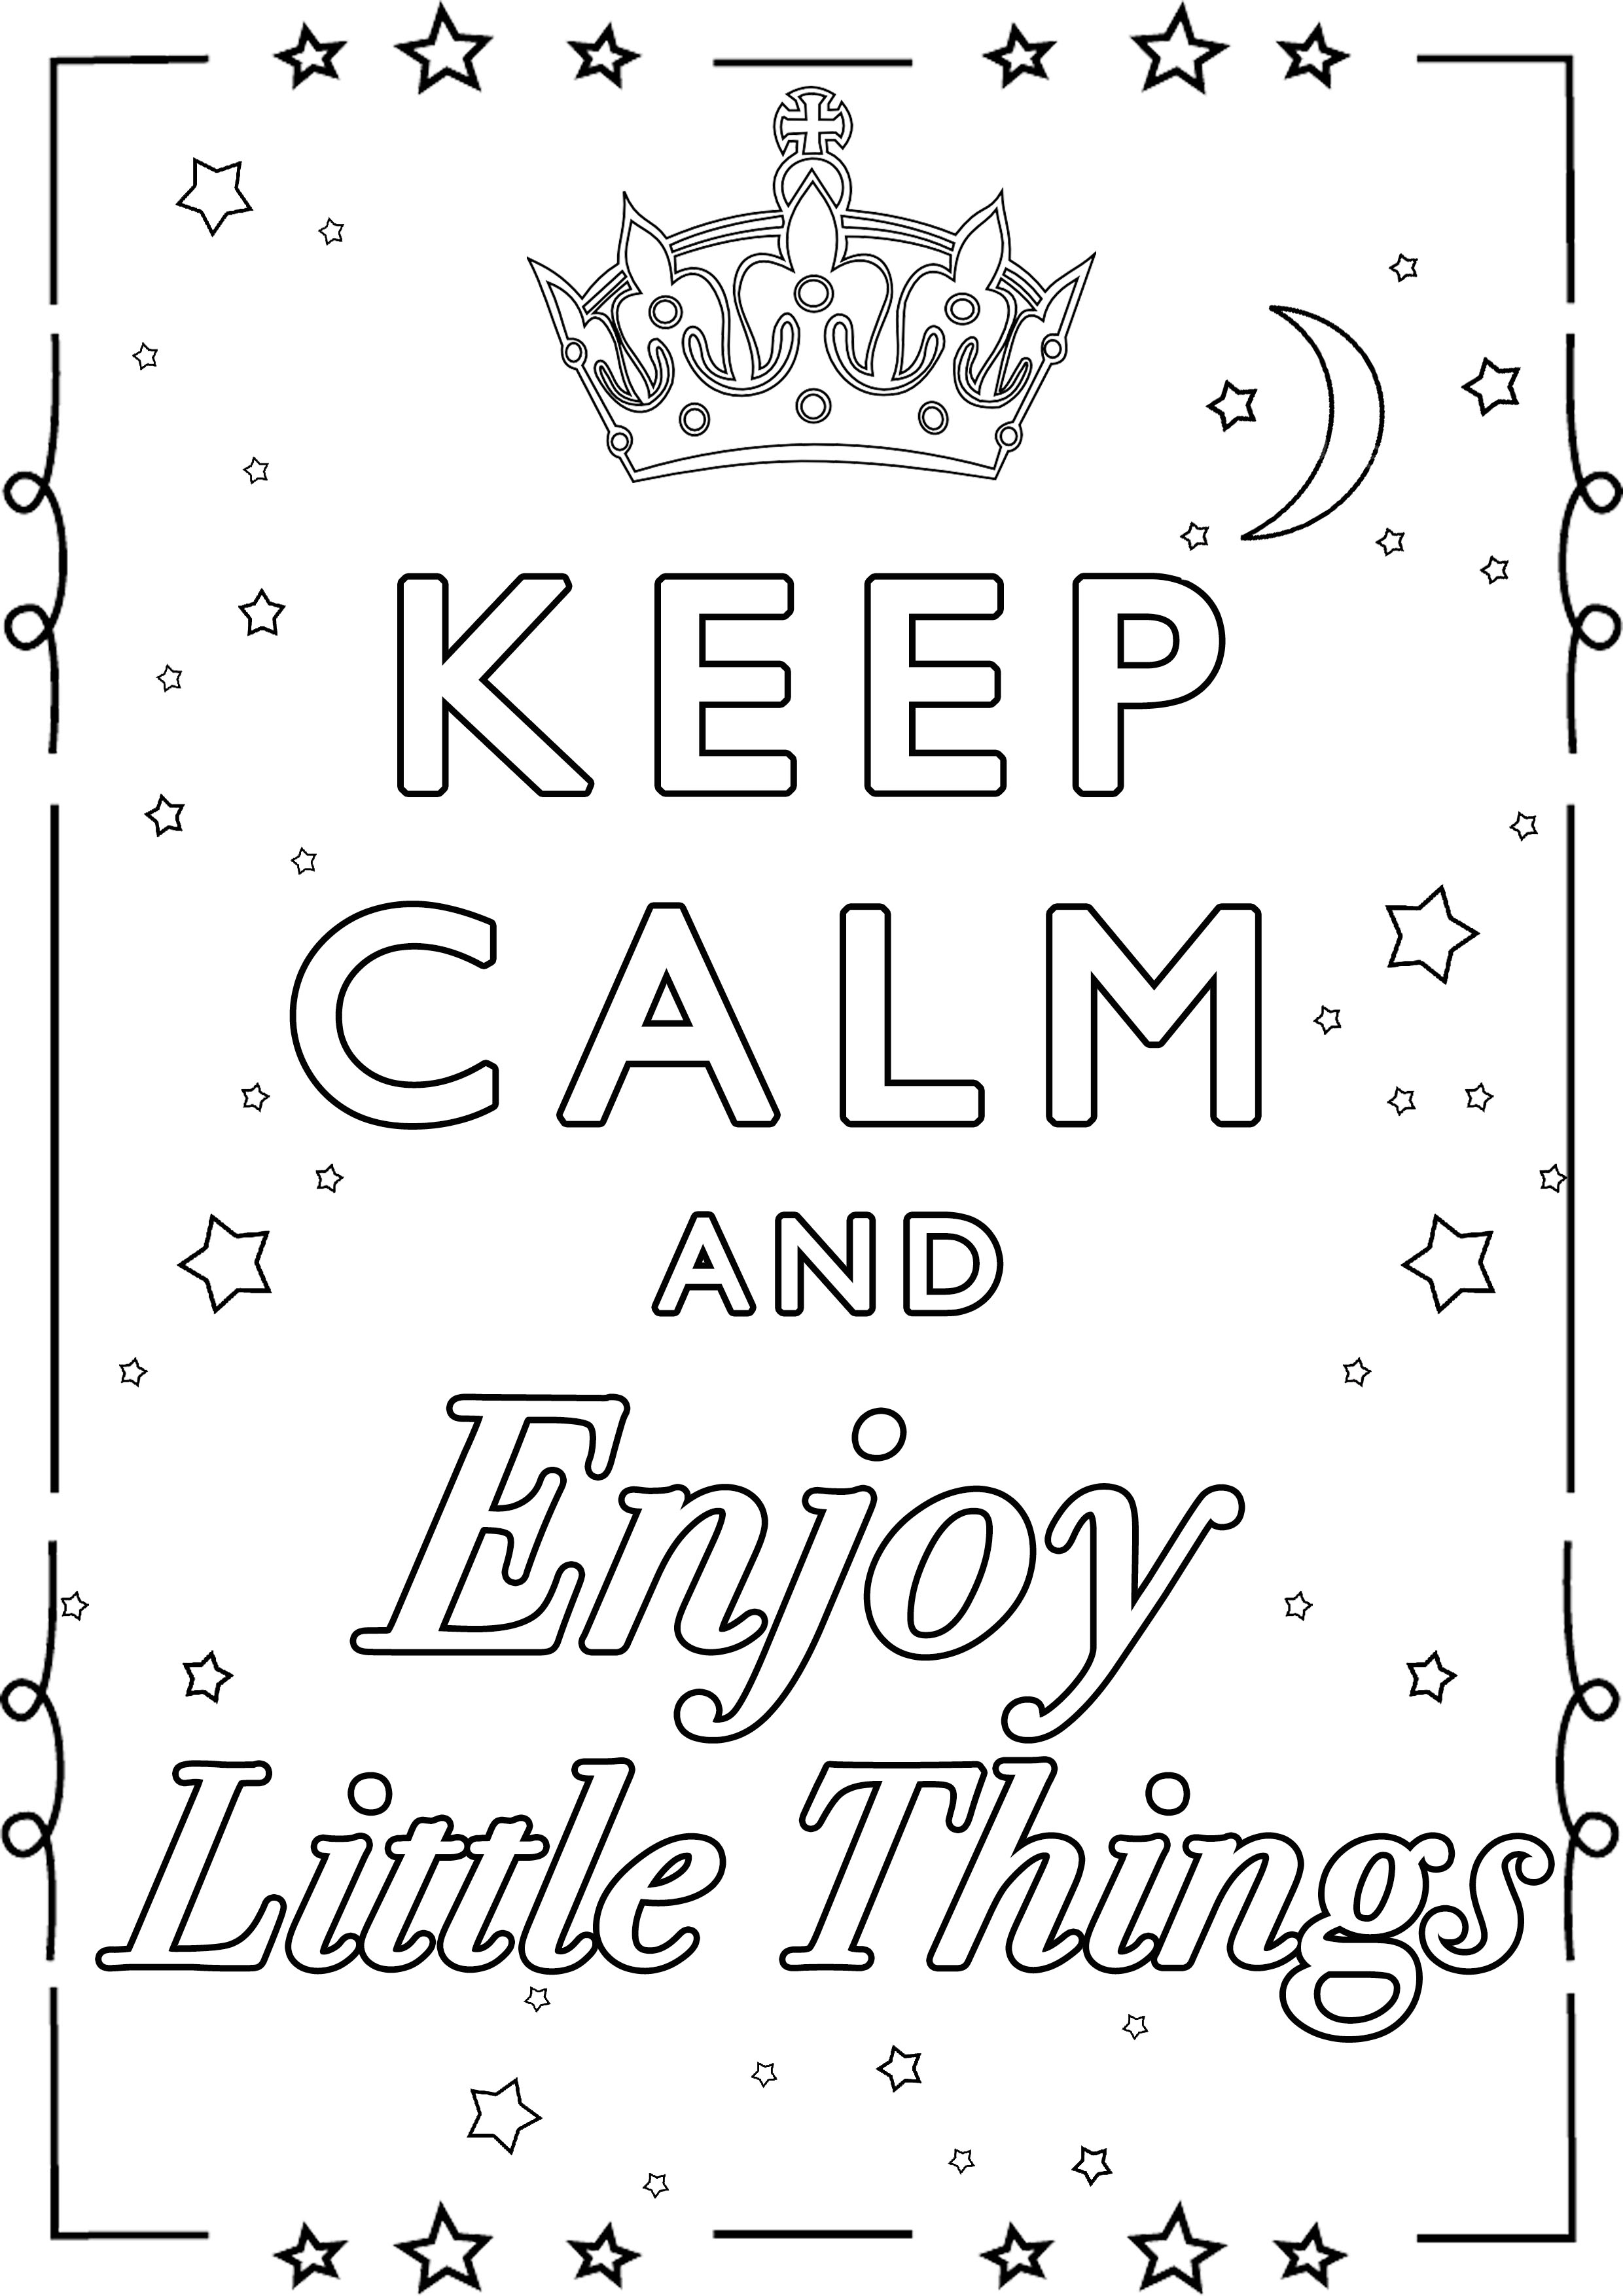 Keep Calm and Enjoy Little Things : Beautiful poster to color, with stars, moon and the famous crown.